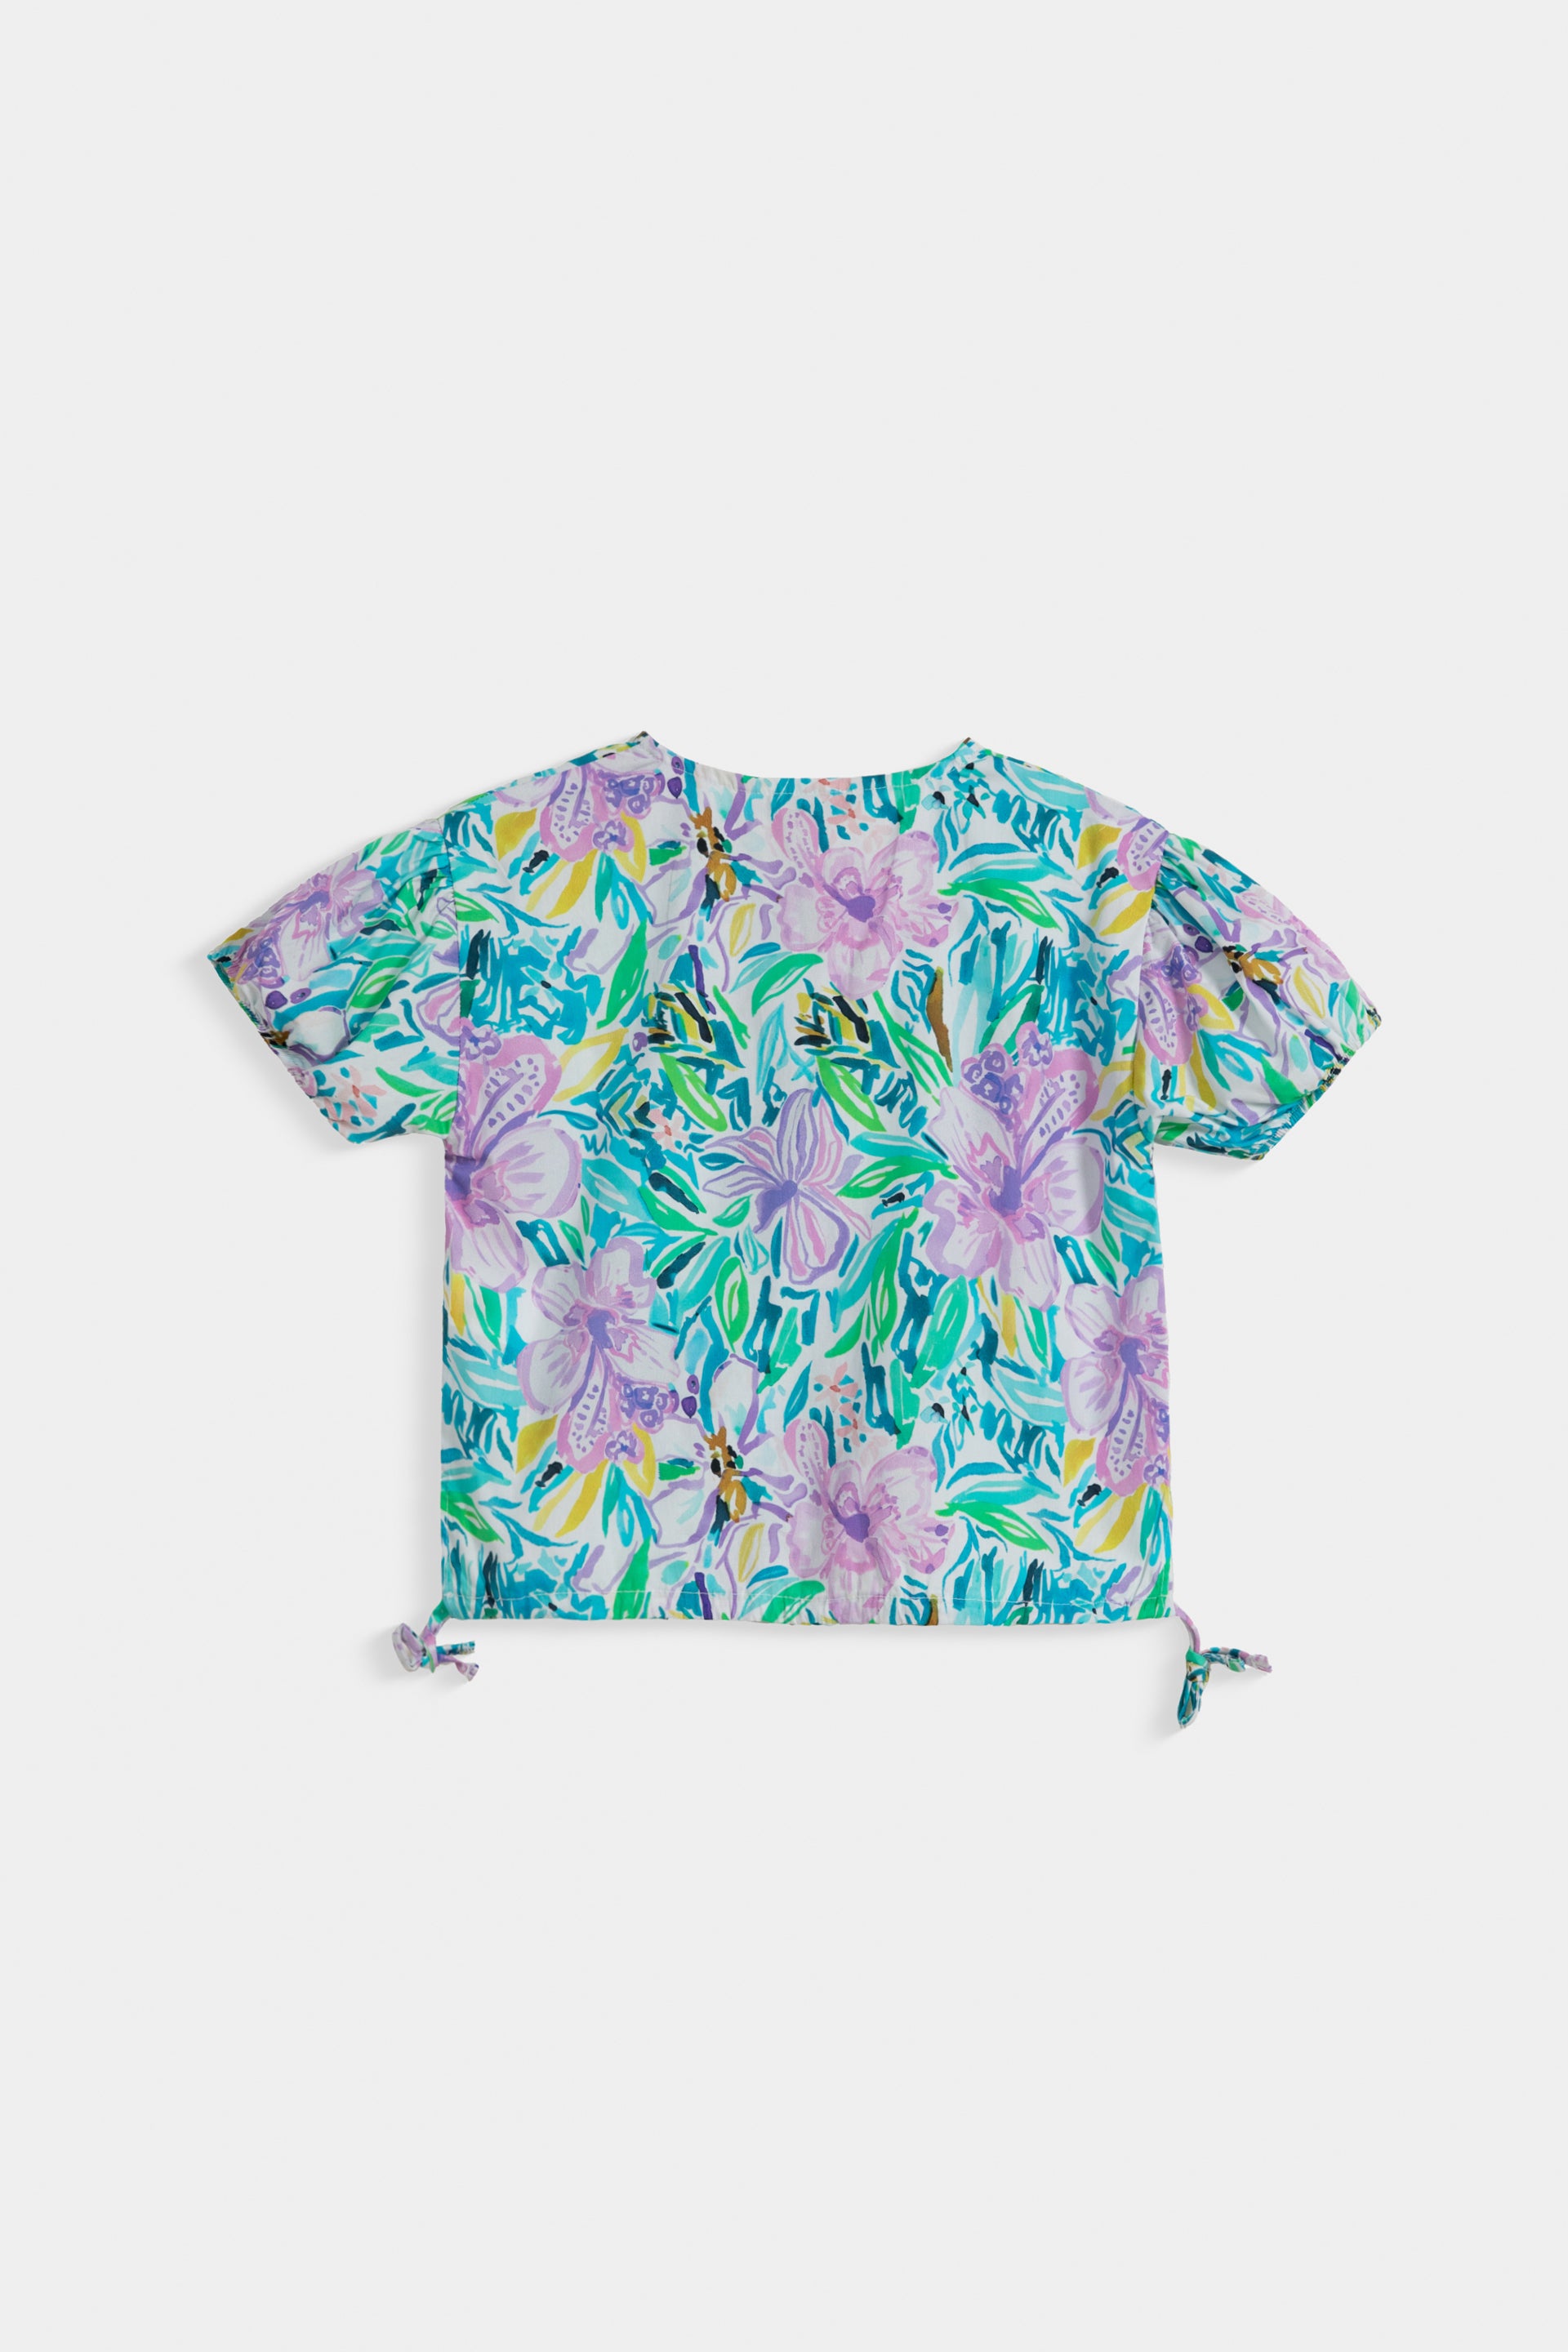 Floral Print Top With Elasticated Sleeve & Hem With Side Knots.